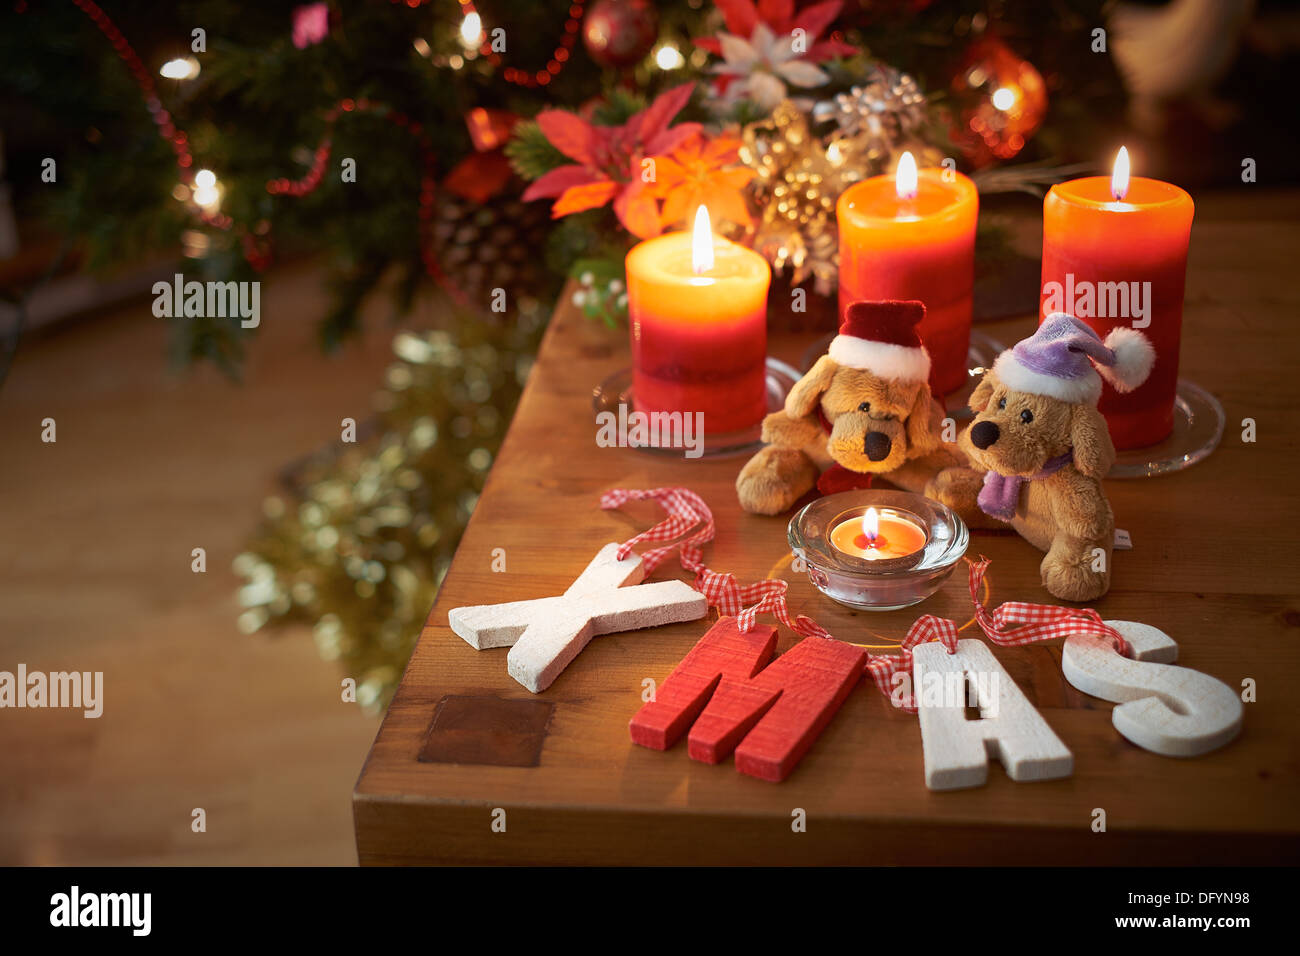 A Christmas tree scene with two teddy bears with lit candles. Stock Photo